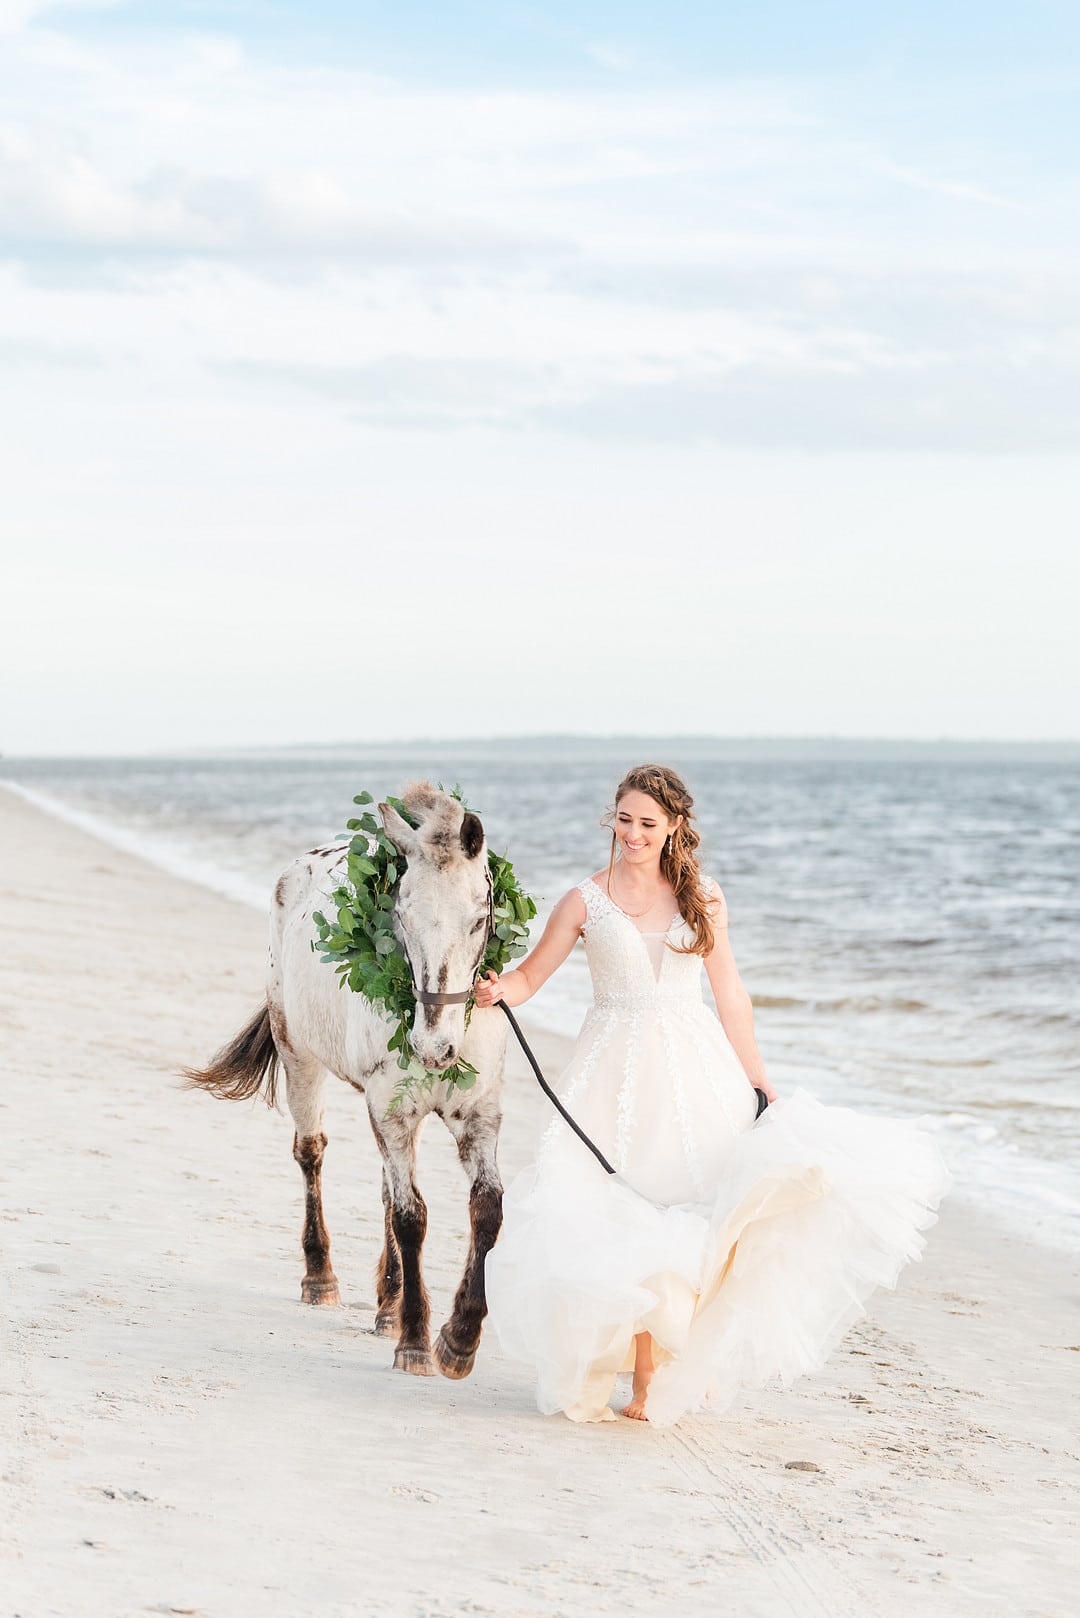 Romantic, Spring Styled Wedding with Horses on the Beach_Christine Austin Photography_©christineaustinphotography_2021_RomanticBeachStyledShoot_Horses_70_low